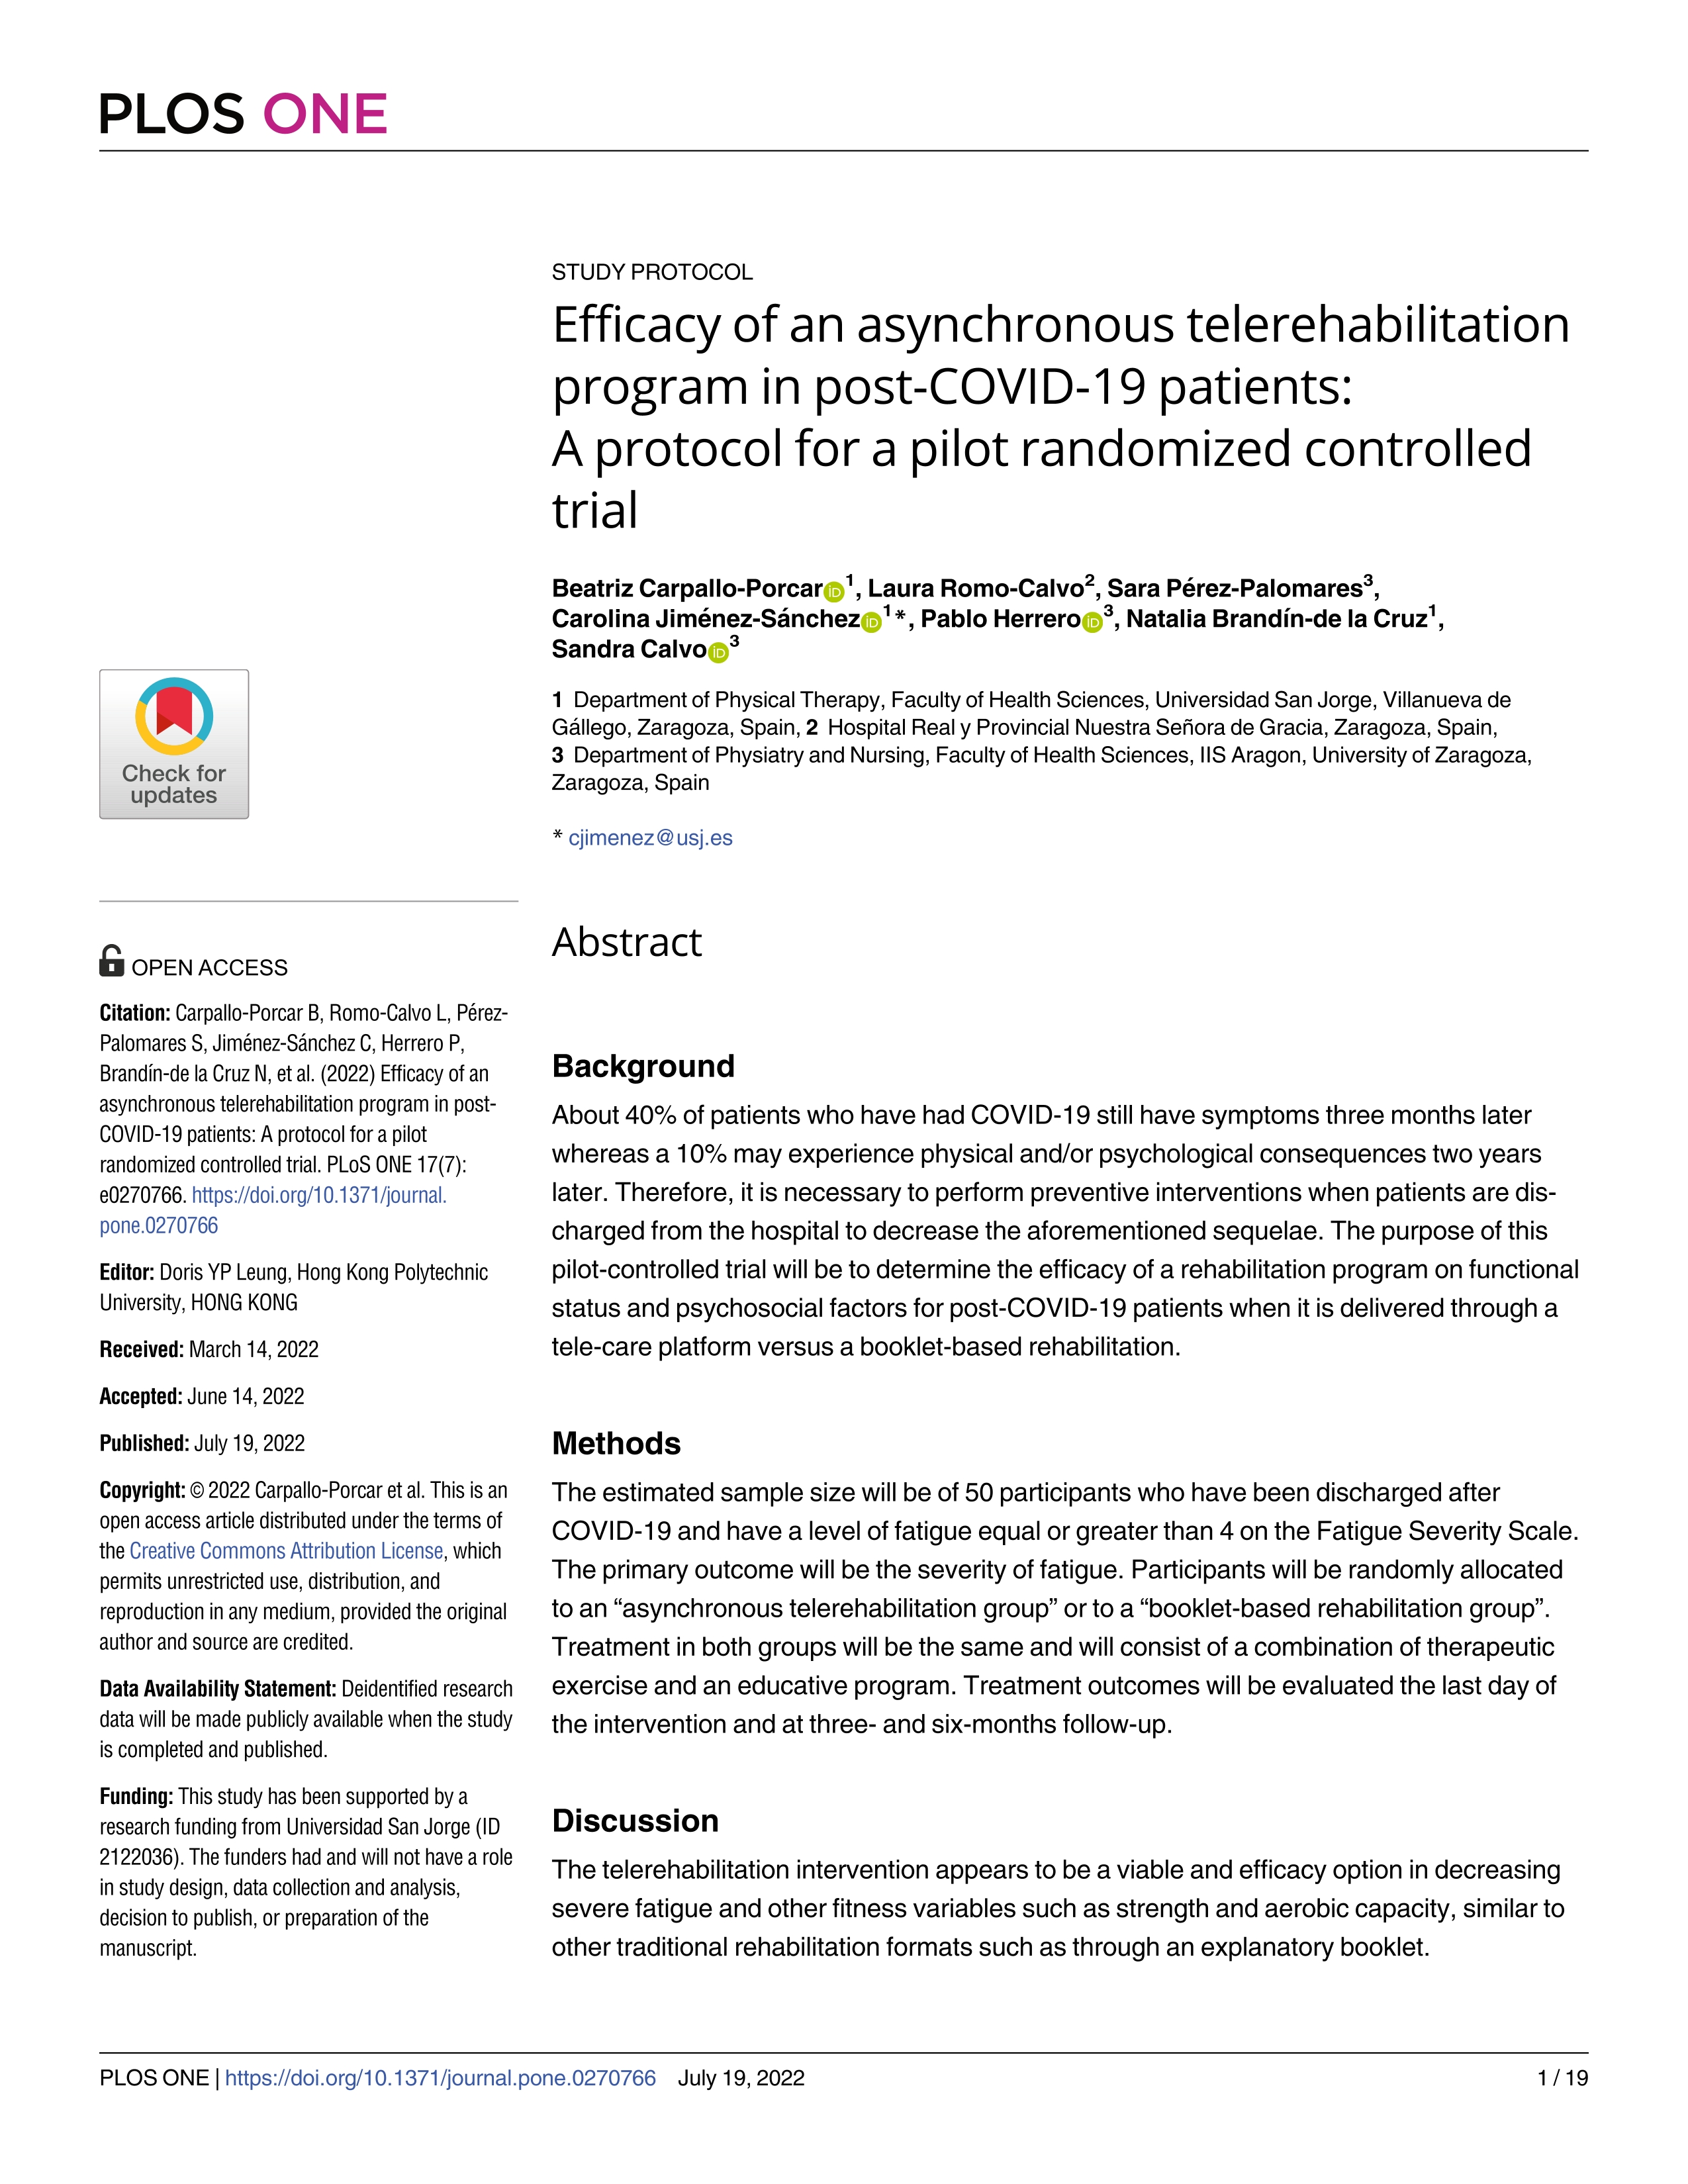 Efficacy of an asynchronous telerehabilitation program in post-COVID-19 patients: A protocol for a pilot randomized controlled trial